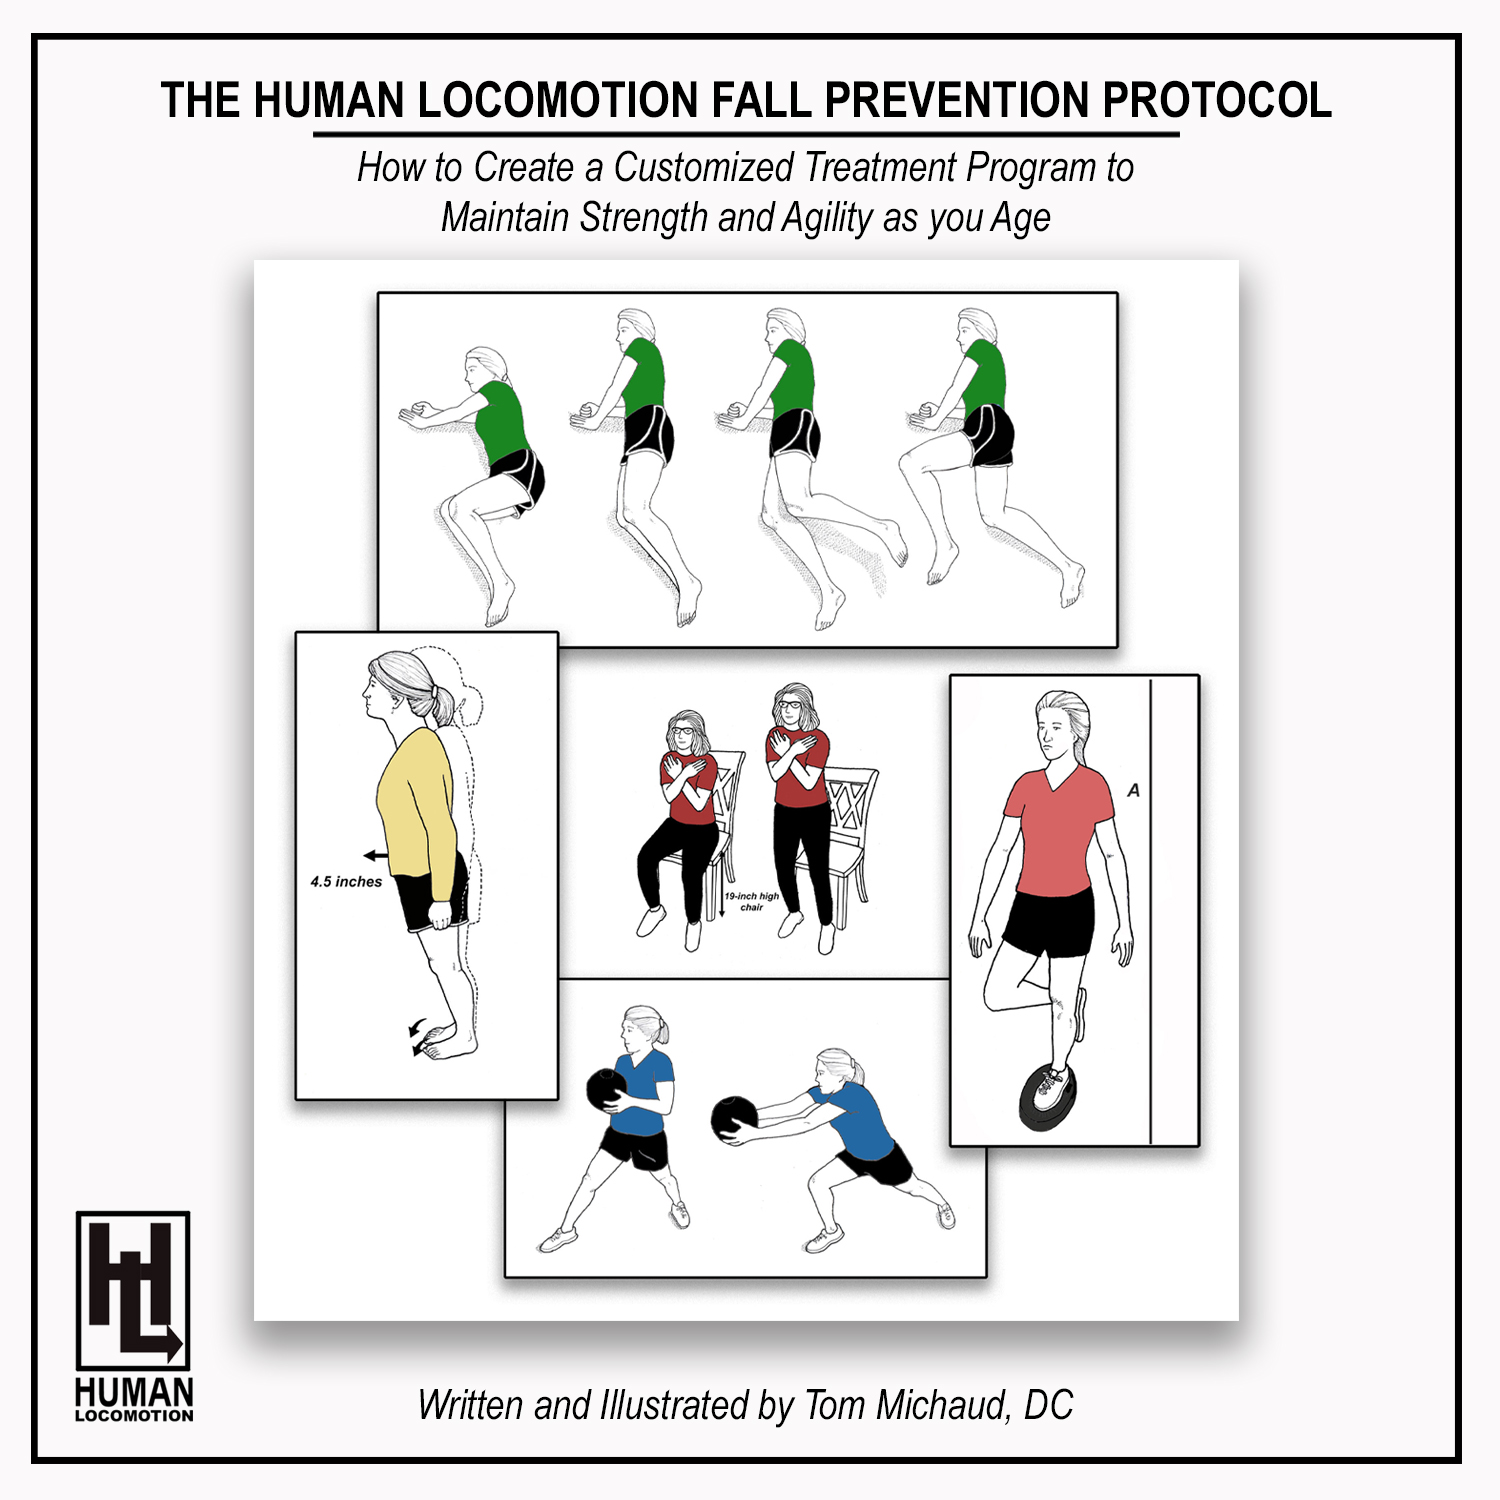 The Human Locomotion Fall Prevention Protocol – How to Create a Customized Treatment Program to Maintain Strength and Agility as You Age